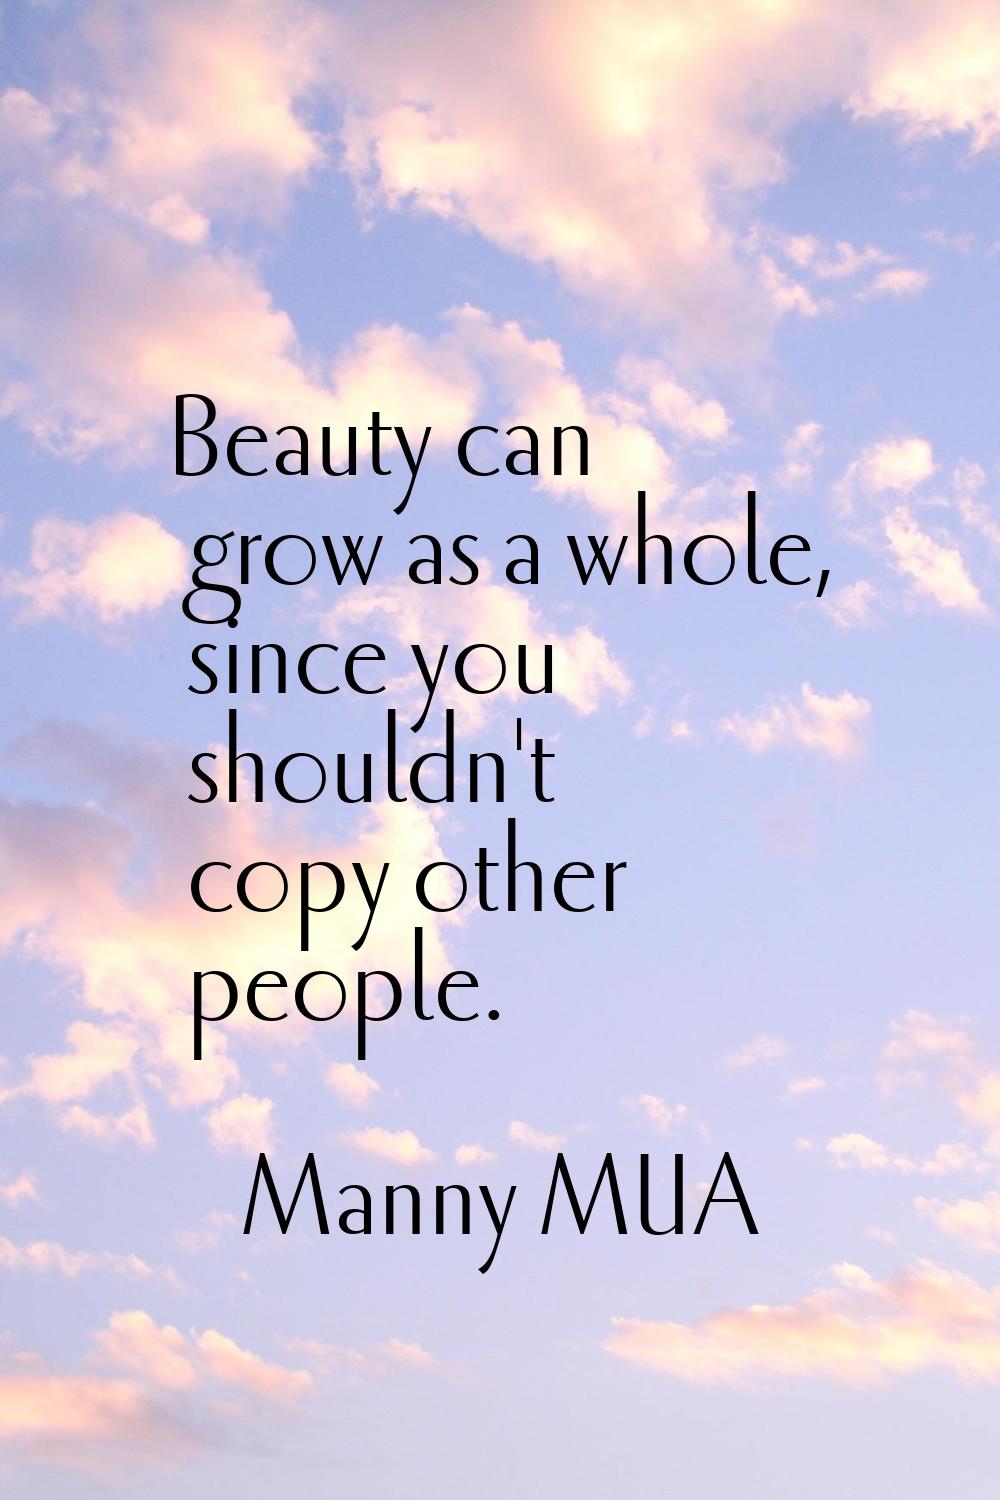 Beauty can grow as a whole, since you shouldn't copy other people.